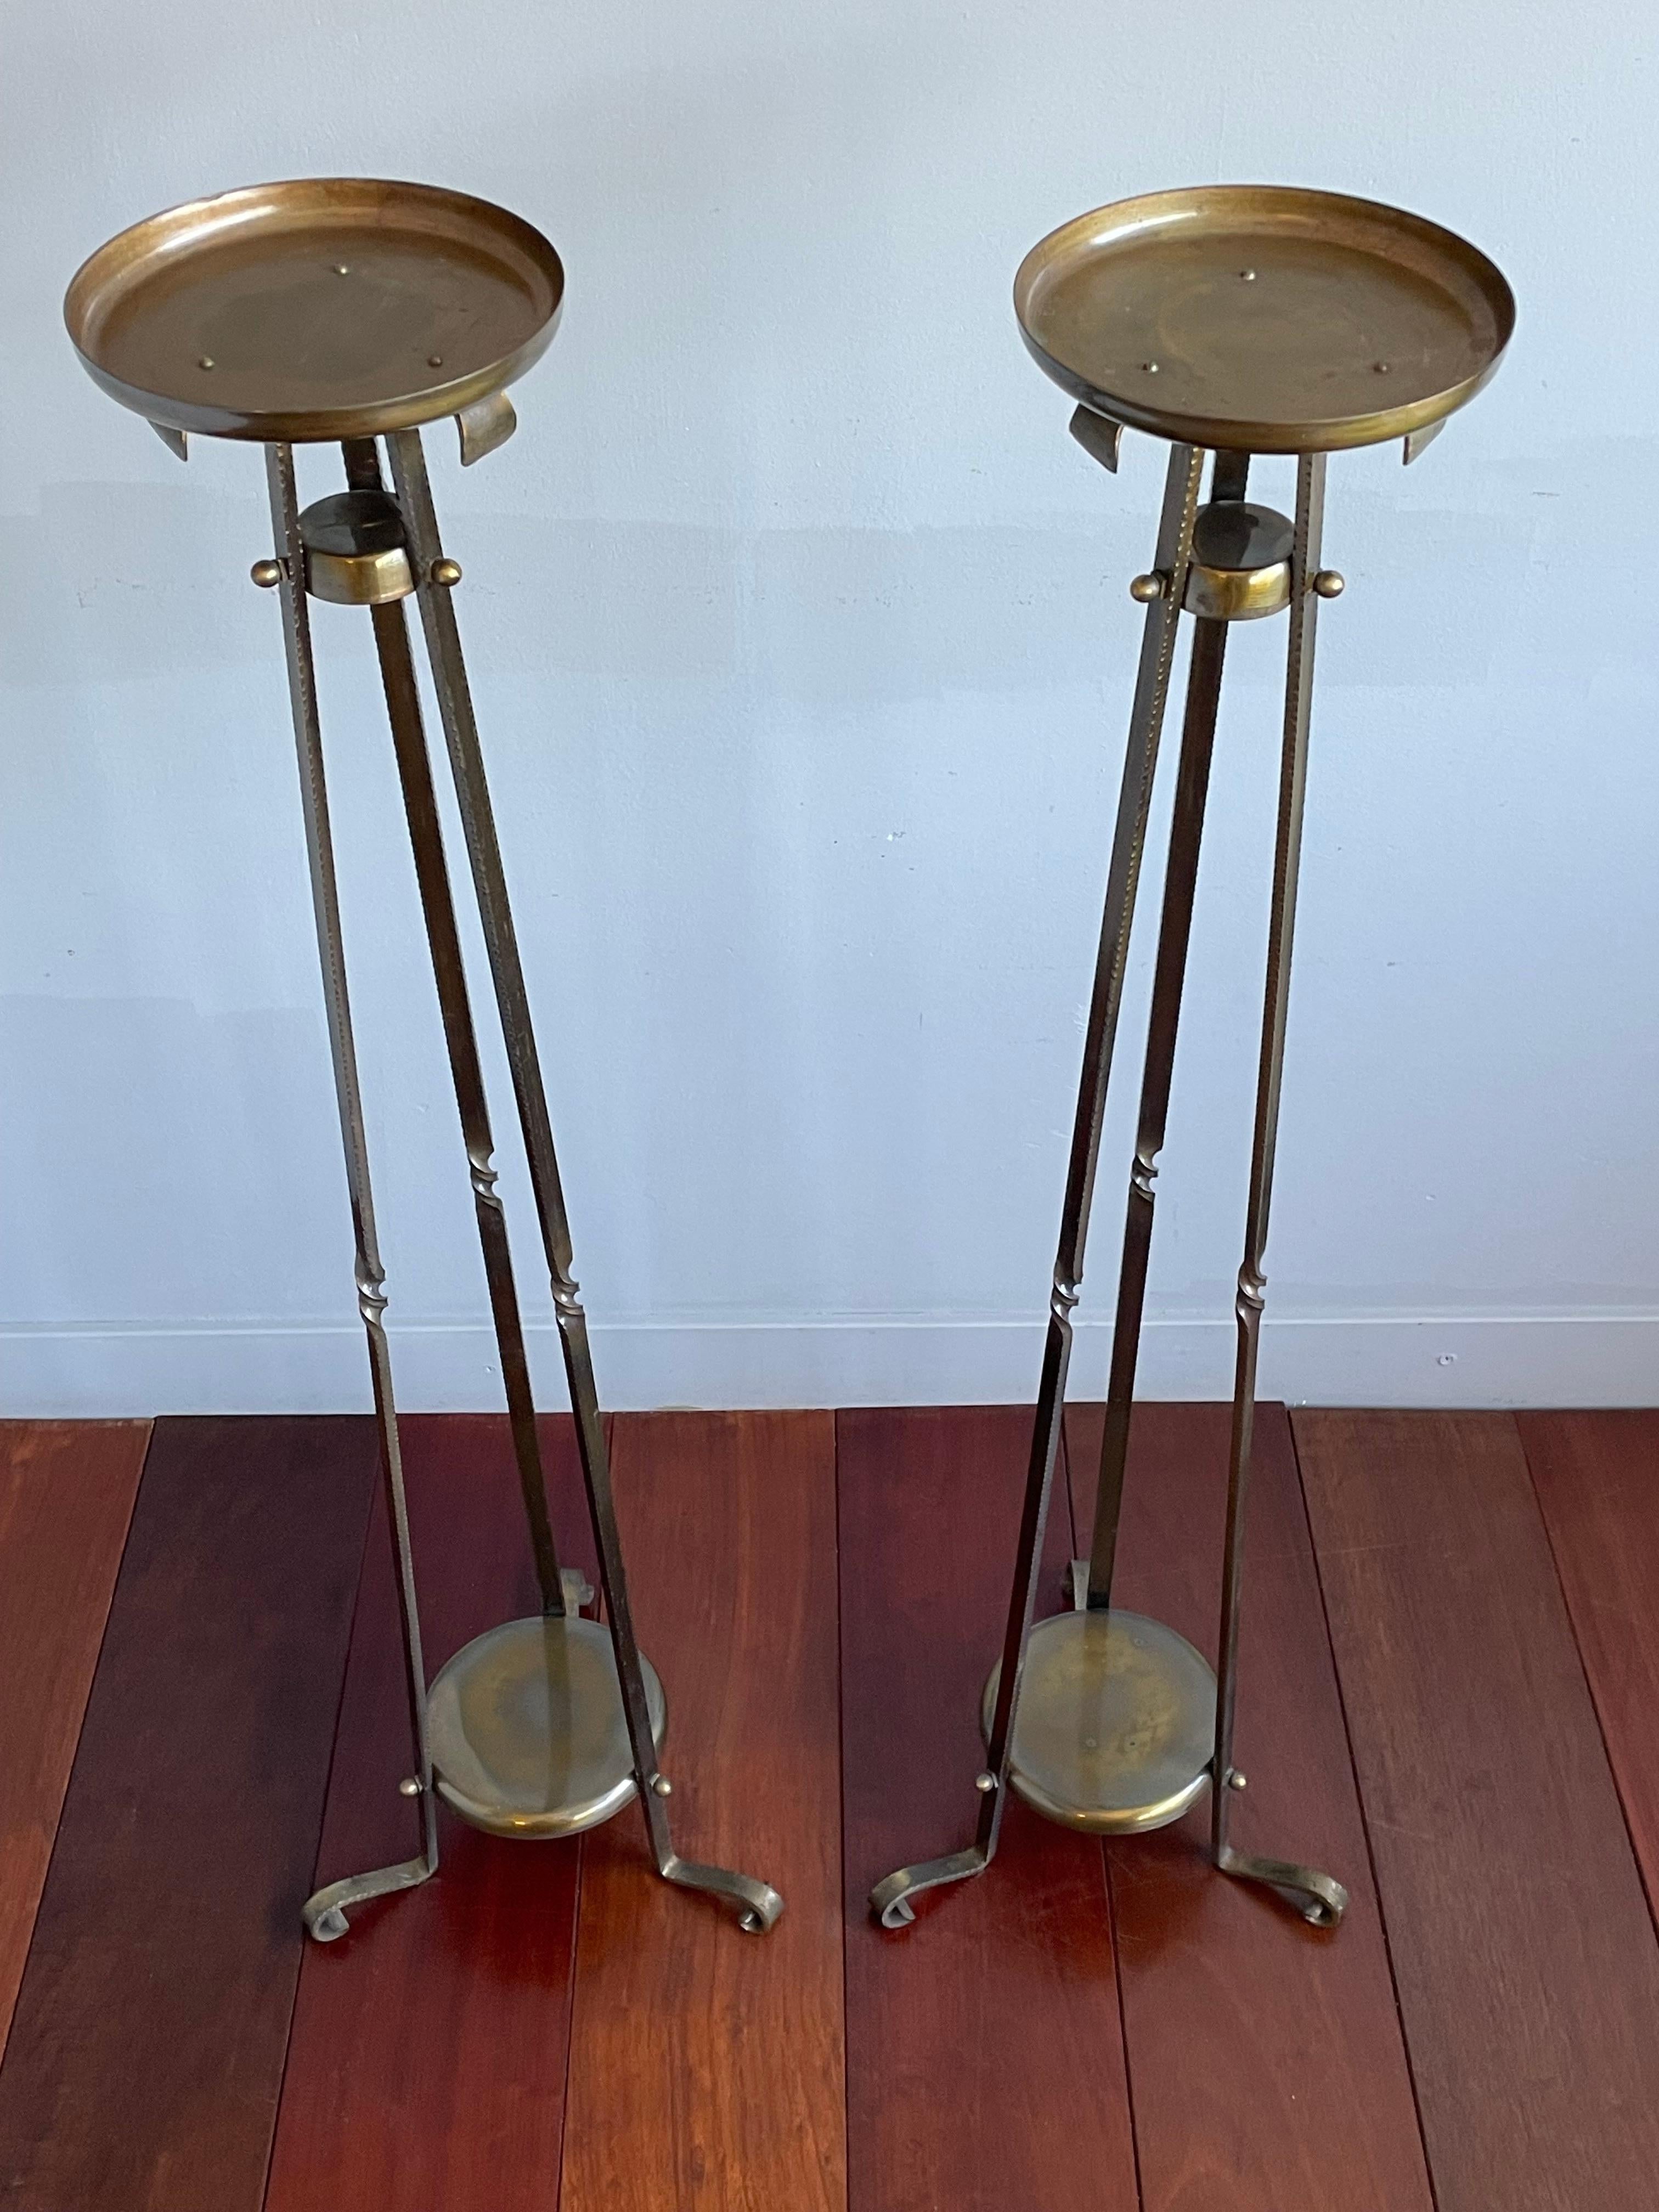 Bronzed Stunning Pair of Forged Brass Arts and Crafts Church Altar Floor Candle Stands For Sale